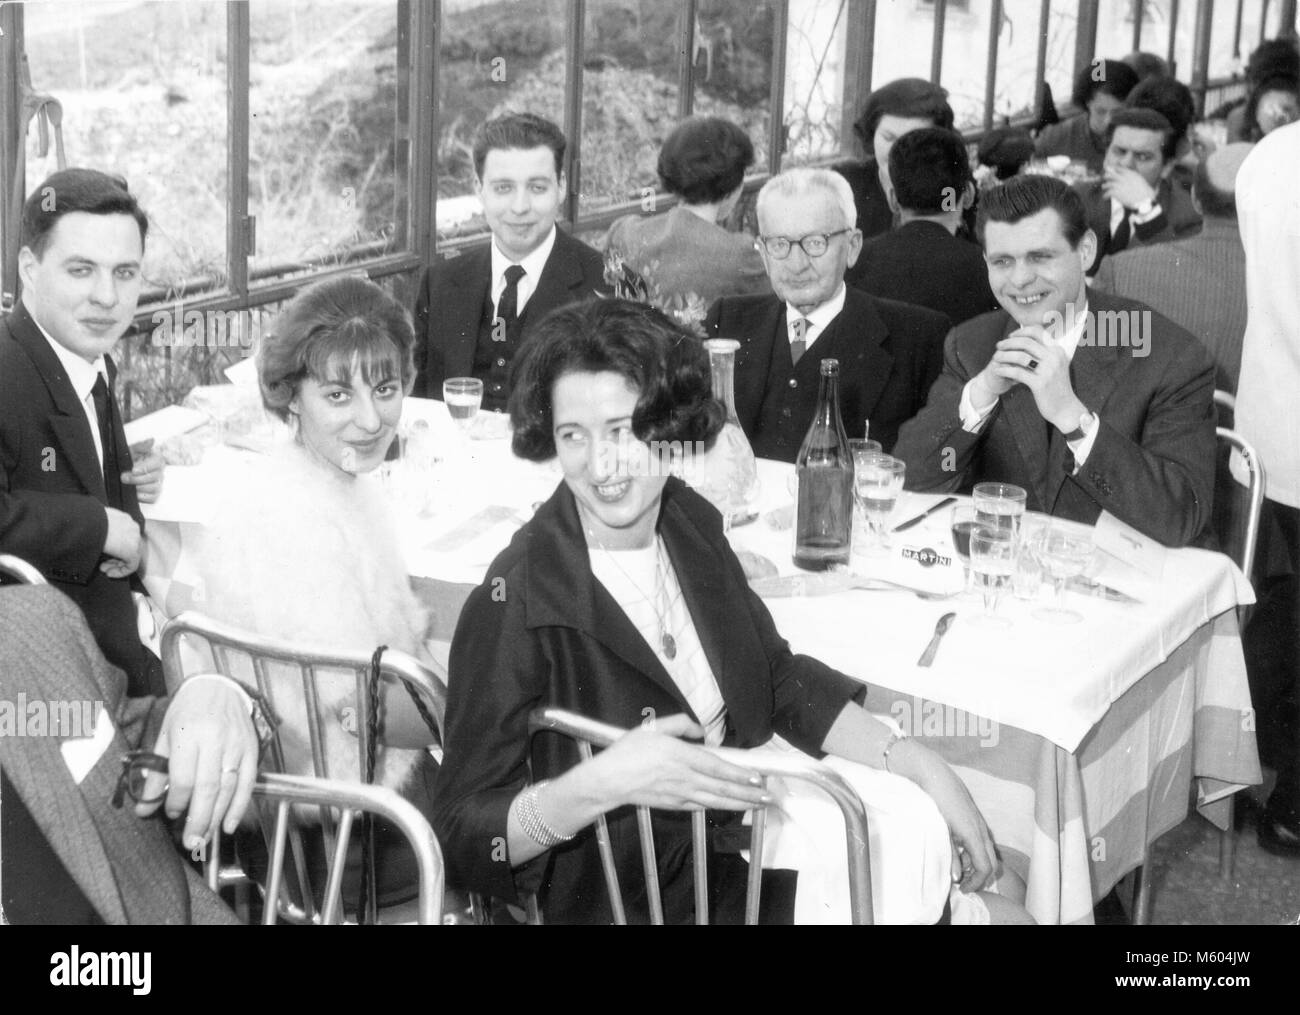 Wedding relatives happy eating during a 1960s 1970s wedding in Italy. Black and white shot. Stock Photo